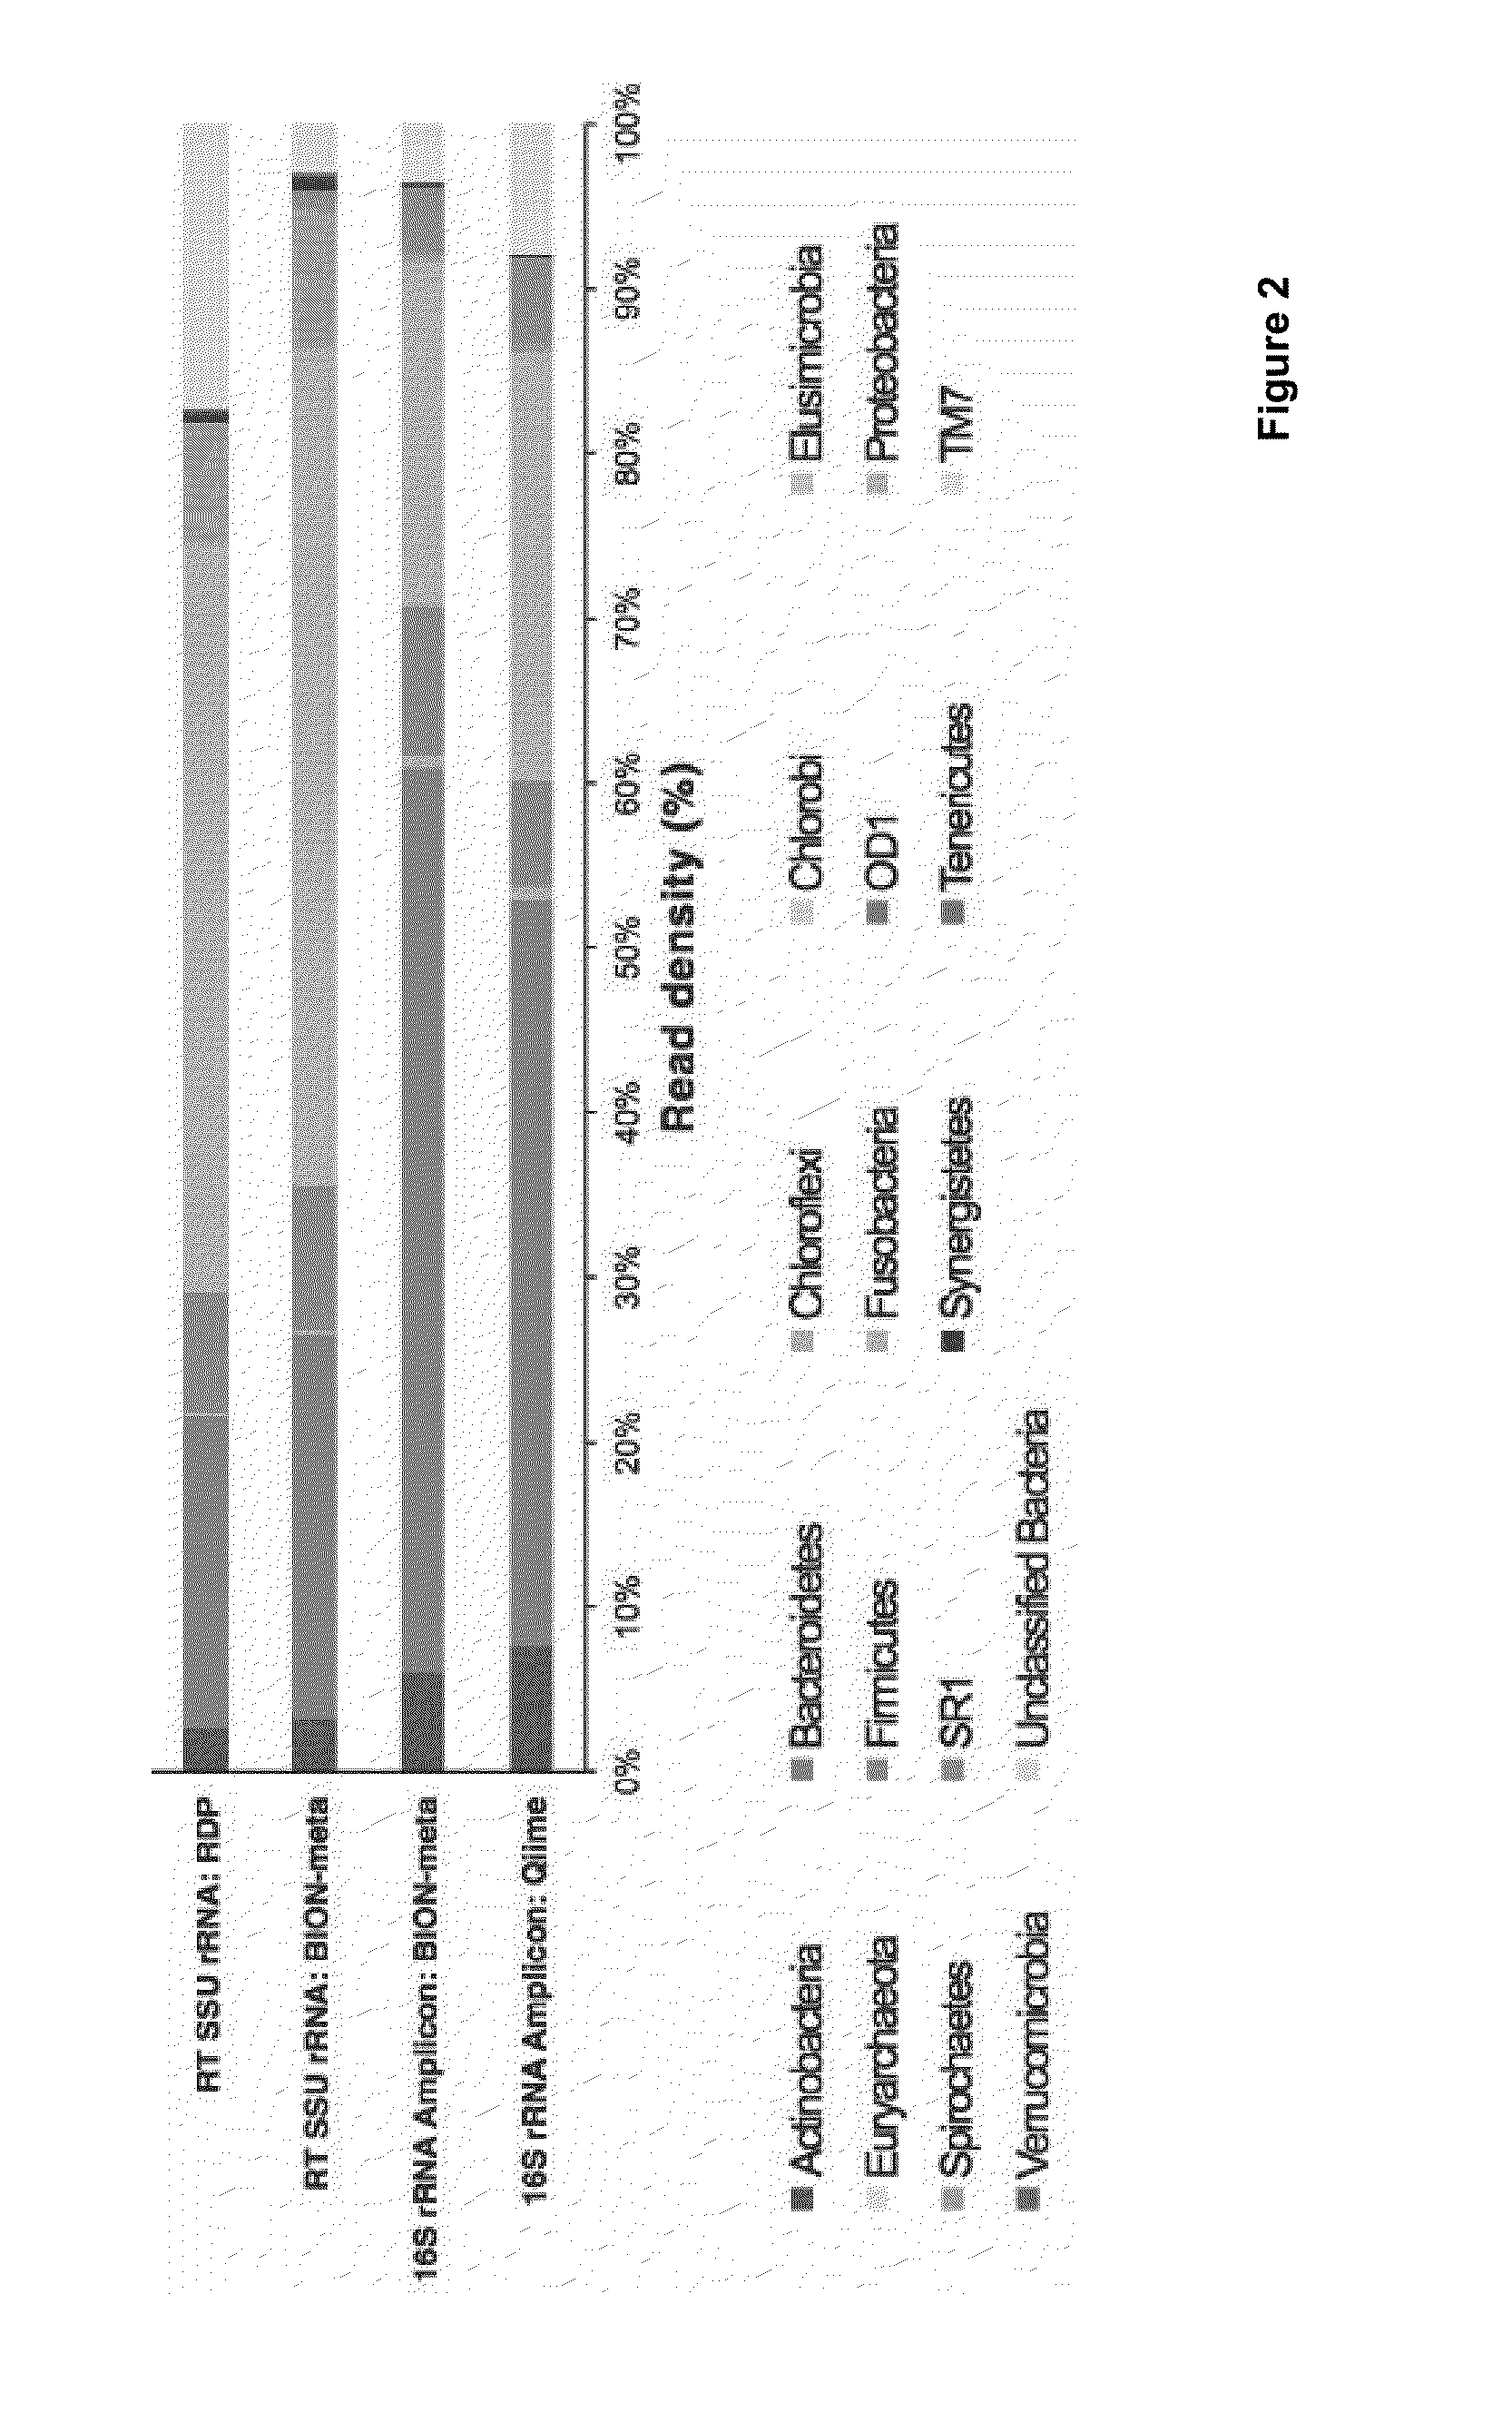 Molecular and bioinformatics methods for direct sequencing